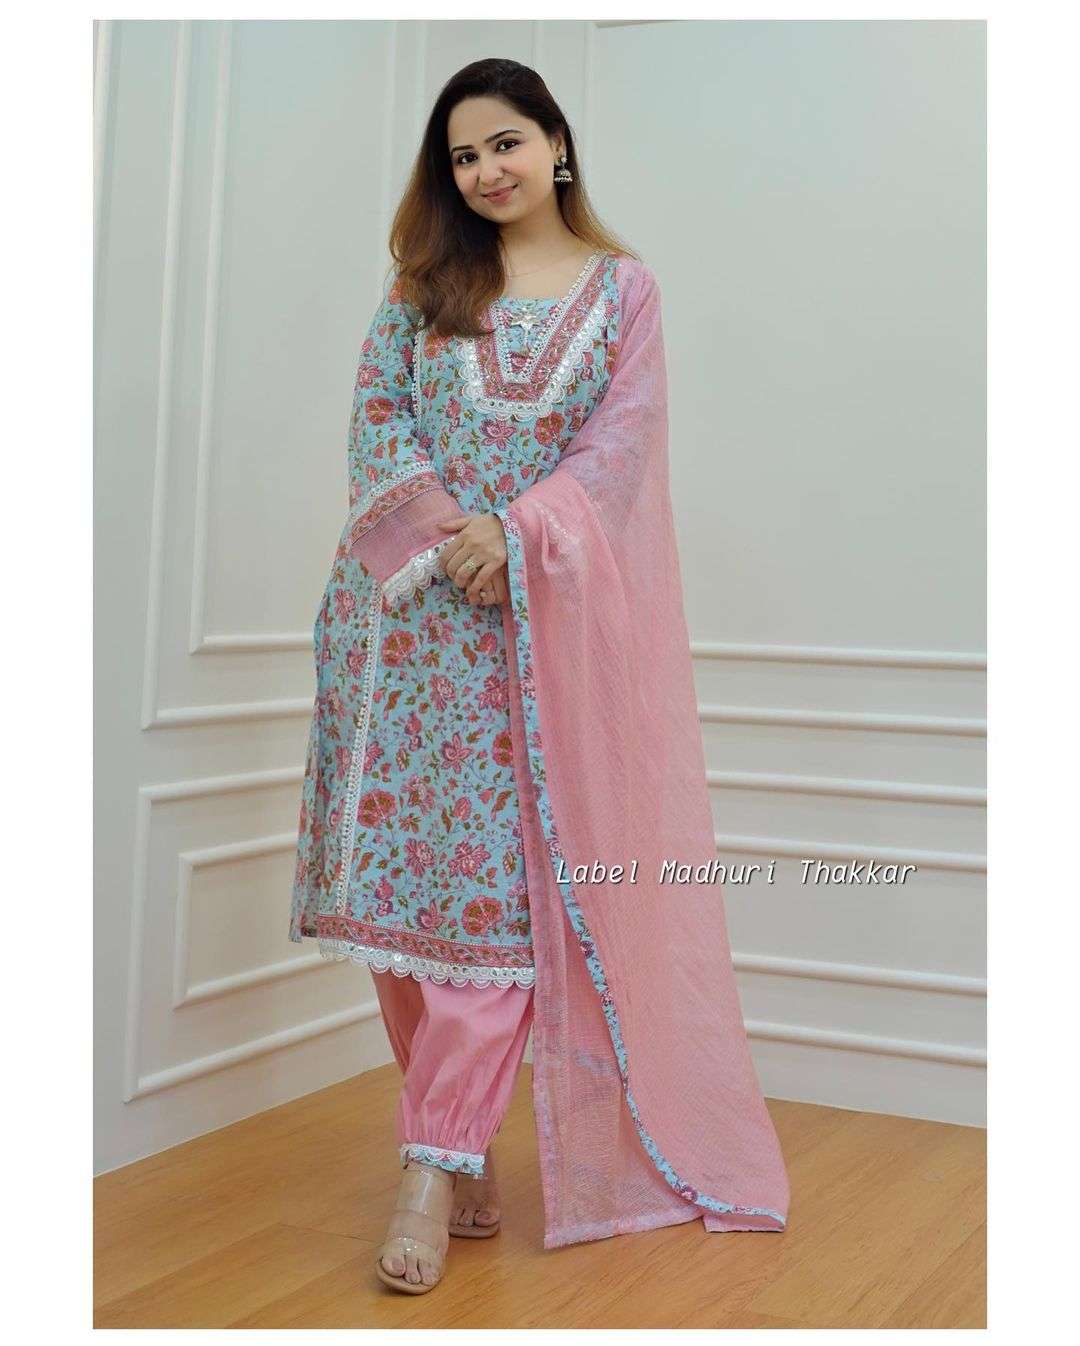 beautiful pakistani cotton suit which is beautiful lace detailings, cutdaana embroidery and prints readymade cotton suit chikankari lace hand work gota work embroidery work